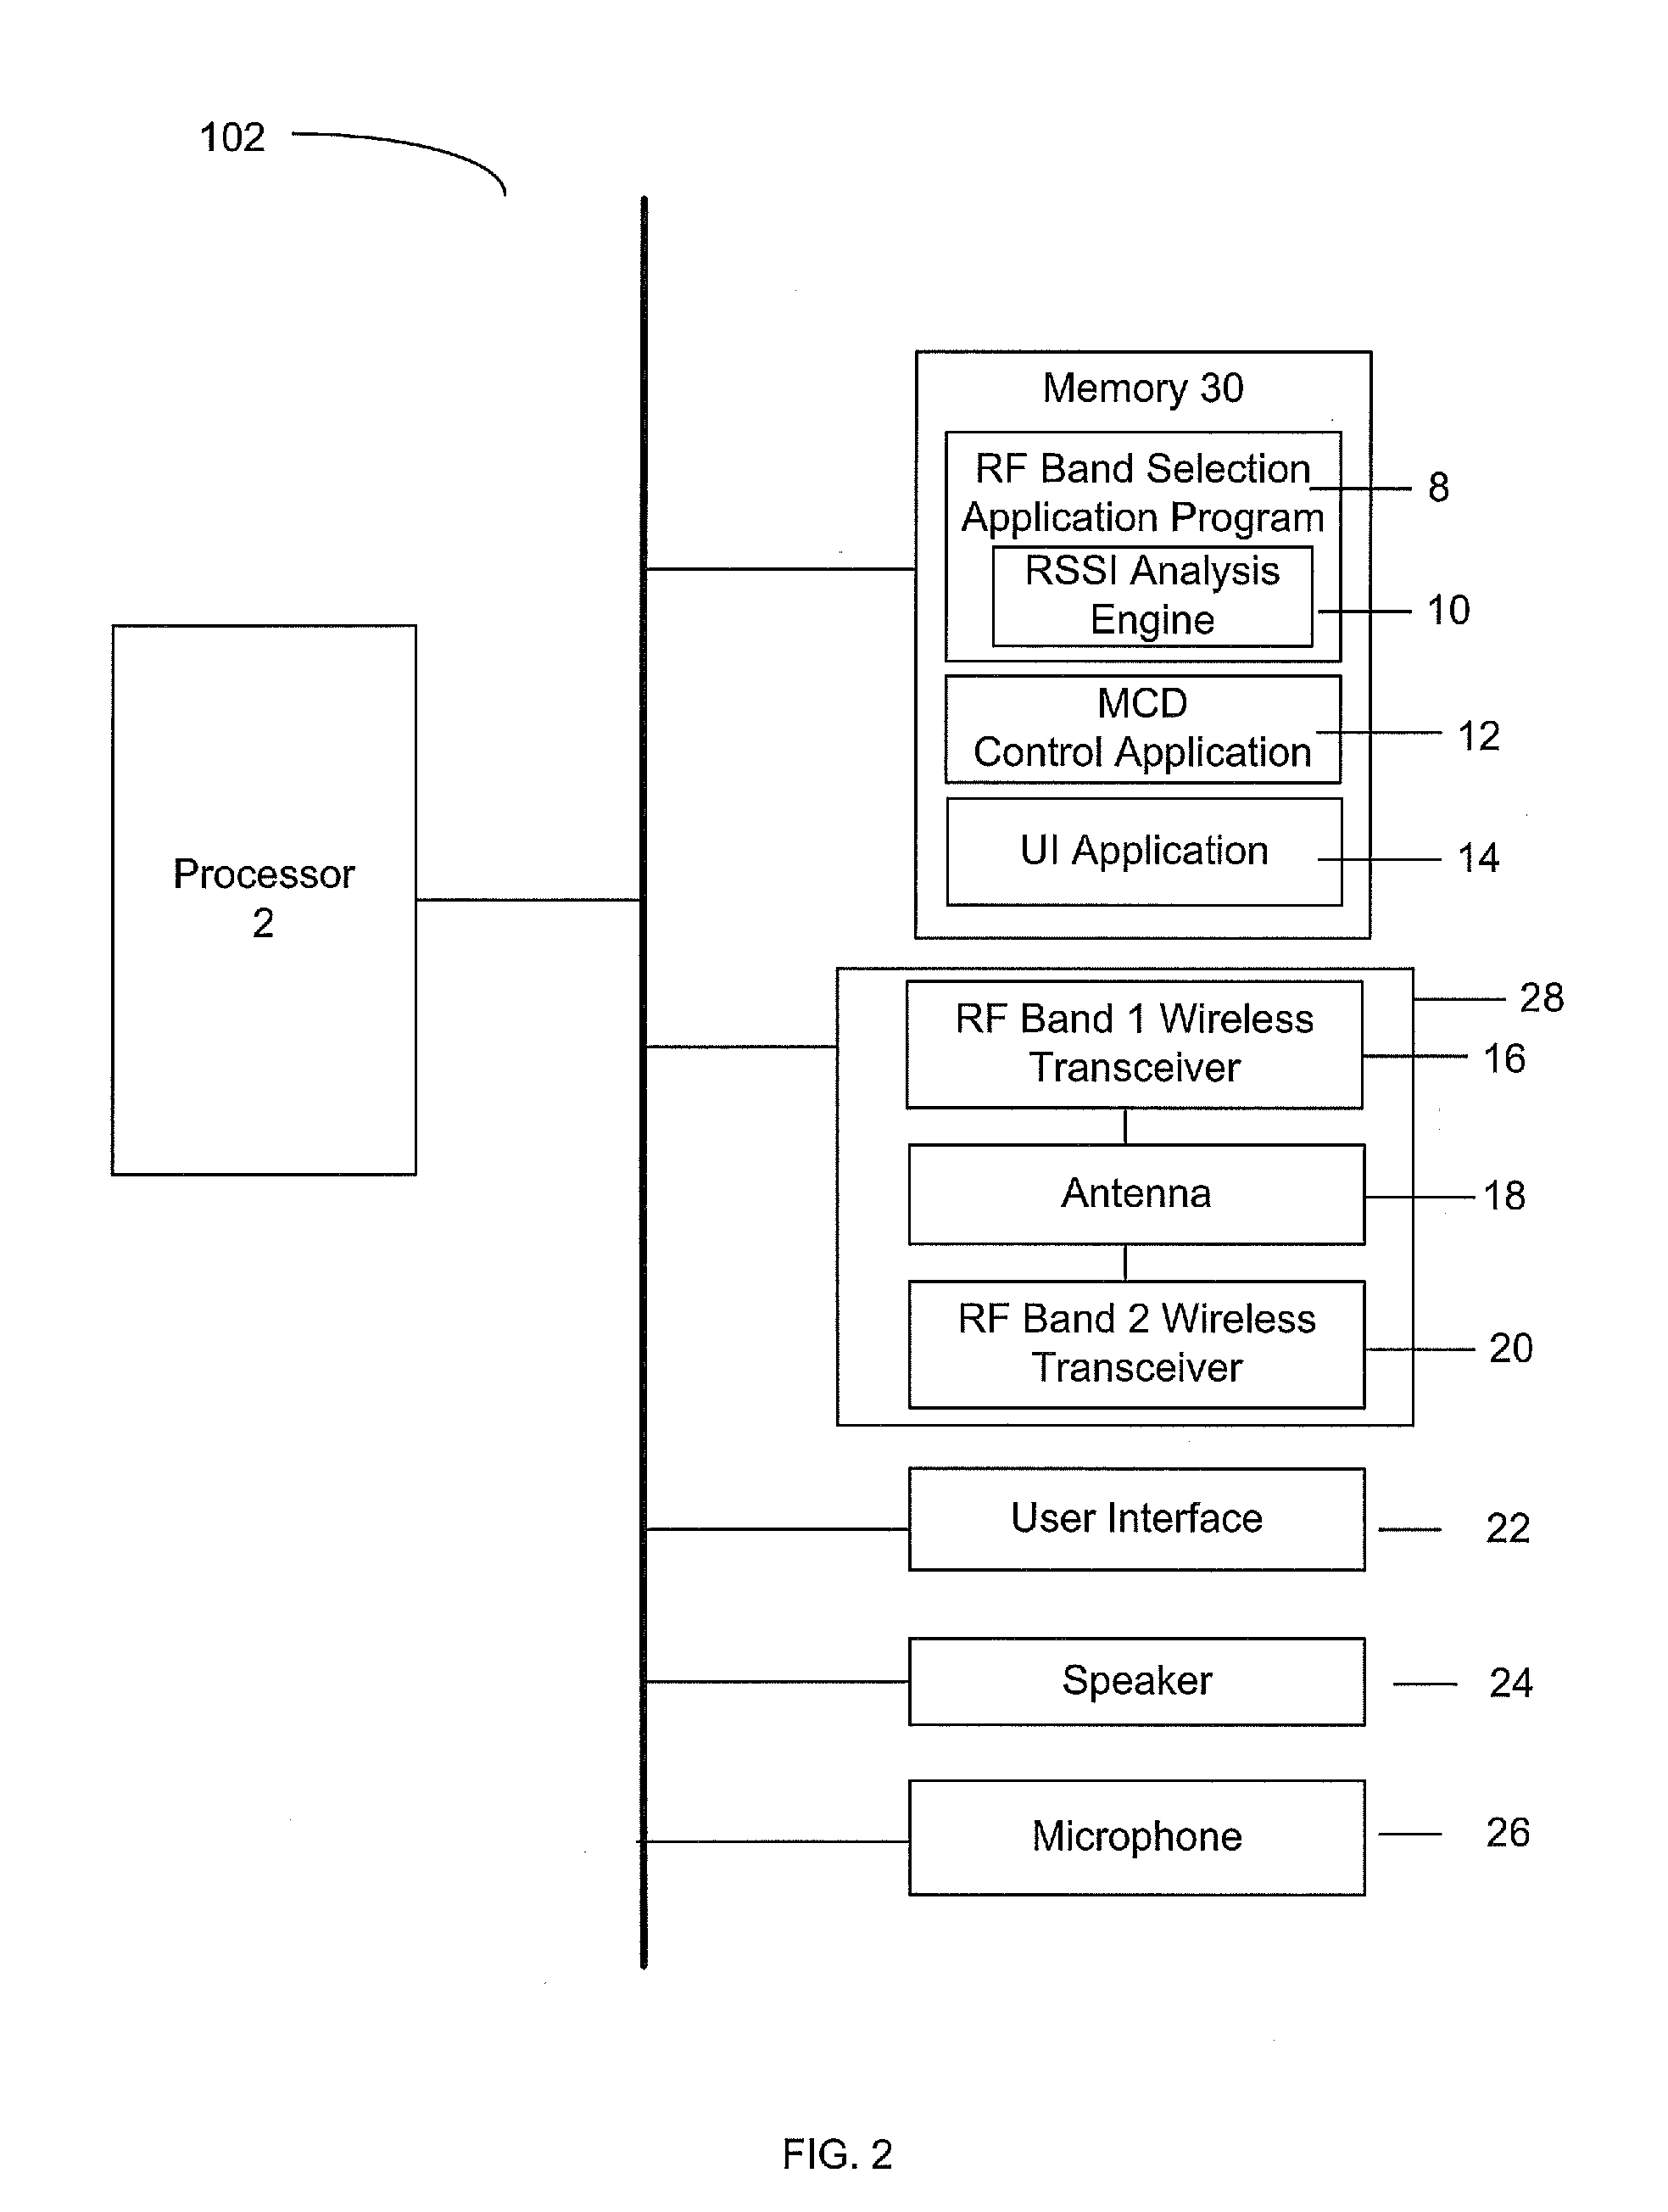 Multiple RF Band Operation in Mobile Devices